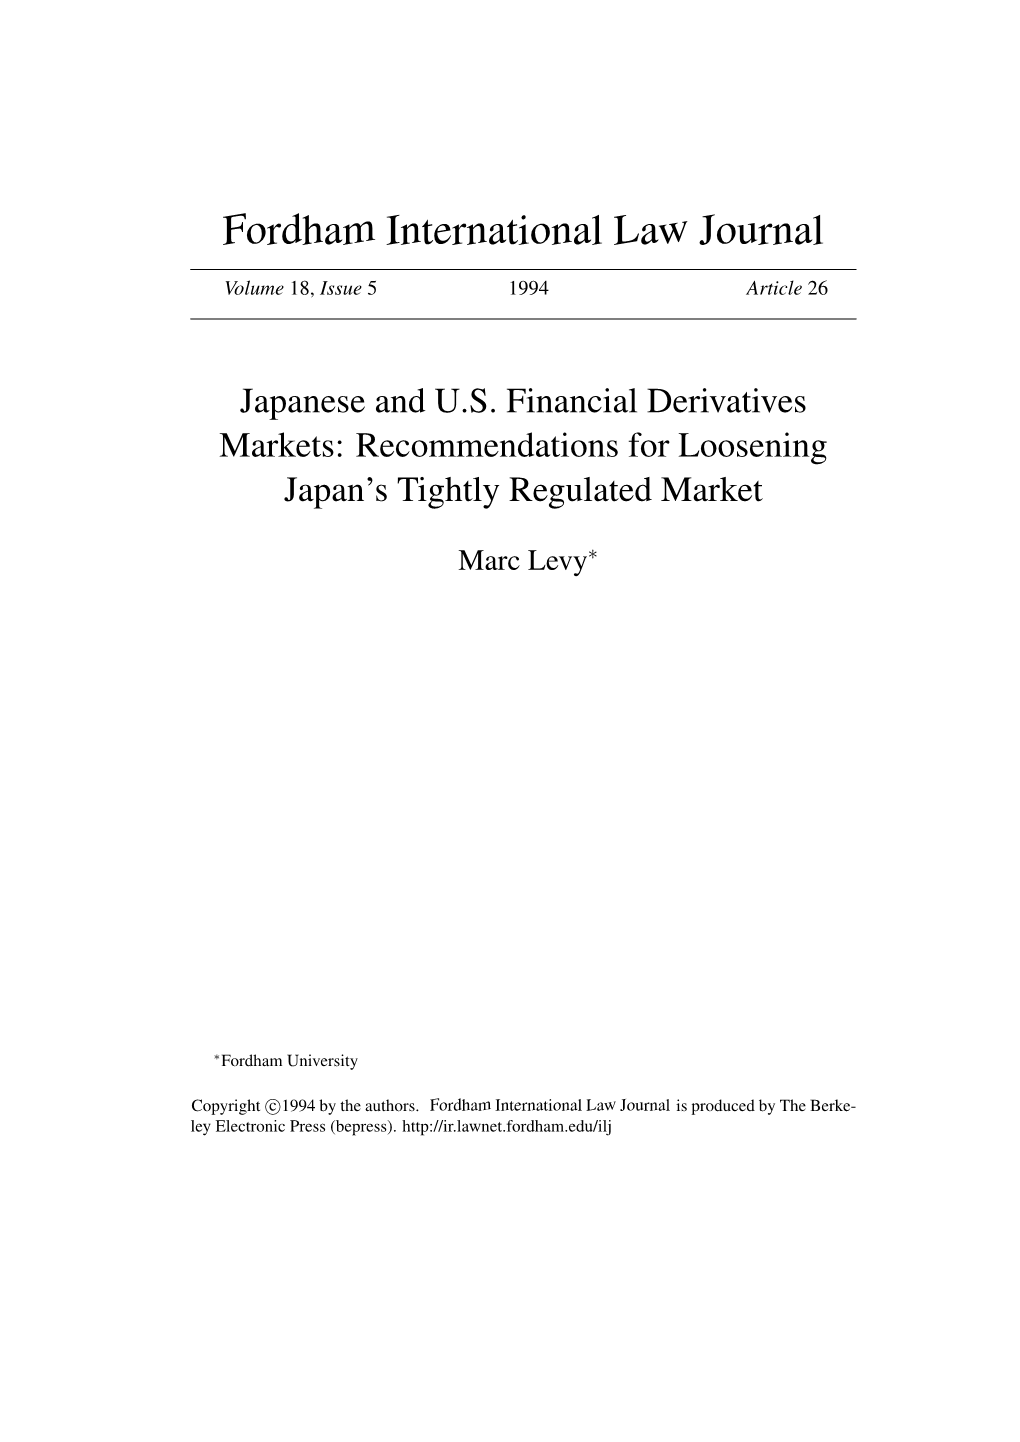 Japanese and US Financial Derivatives